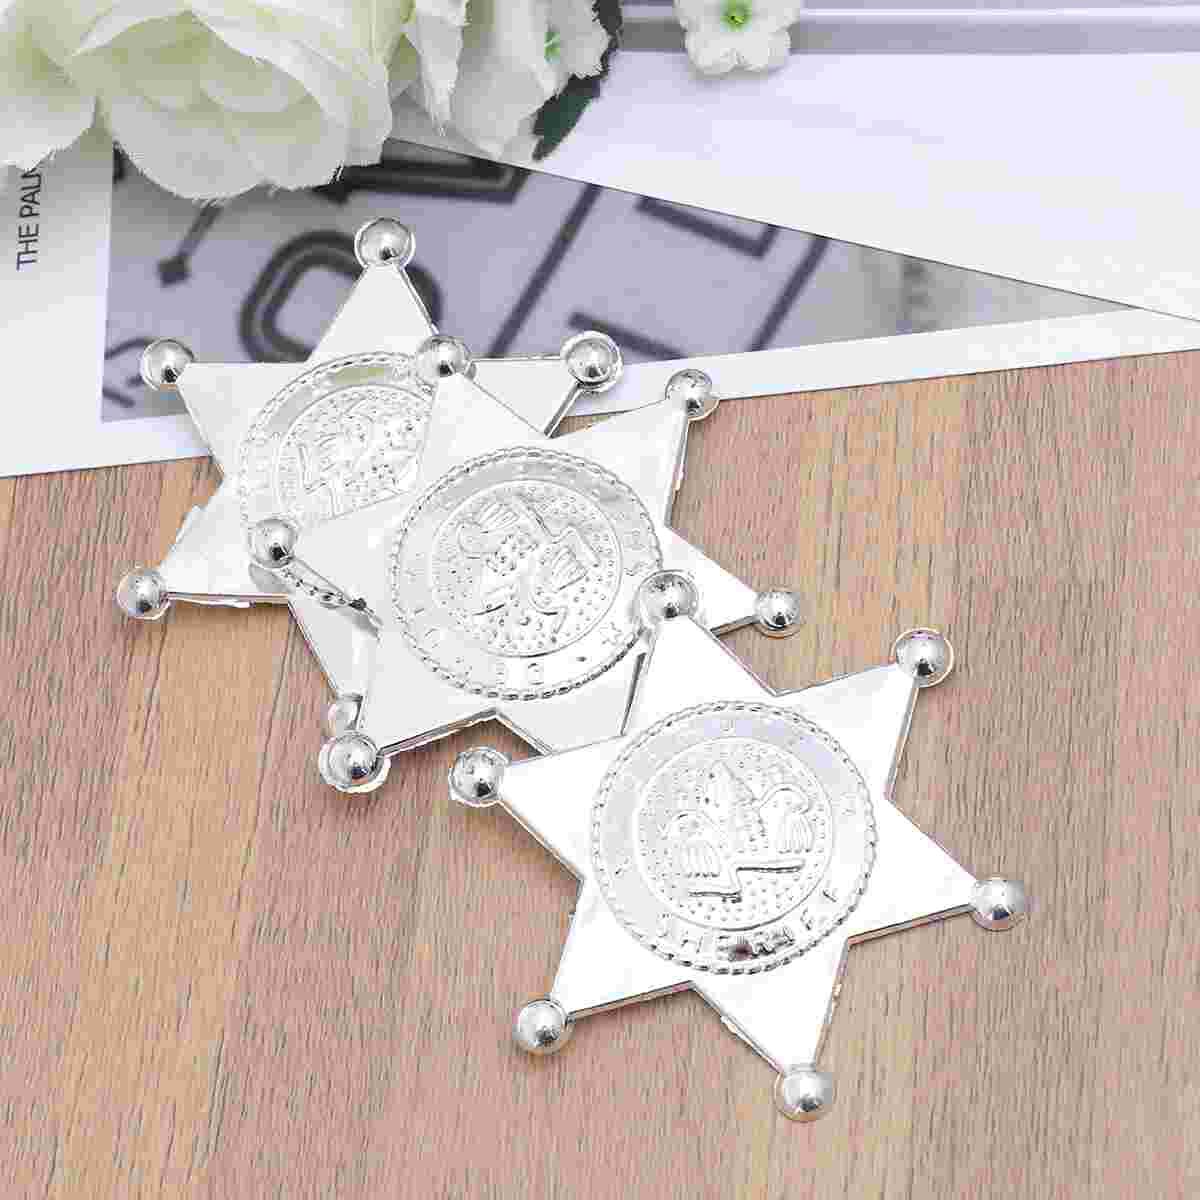 12pcs Hexagonal Star Badges Playing Deputy Sheriff Name Tags Brooches House for Bag Party Cowboy Costume